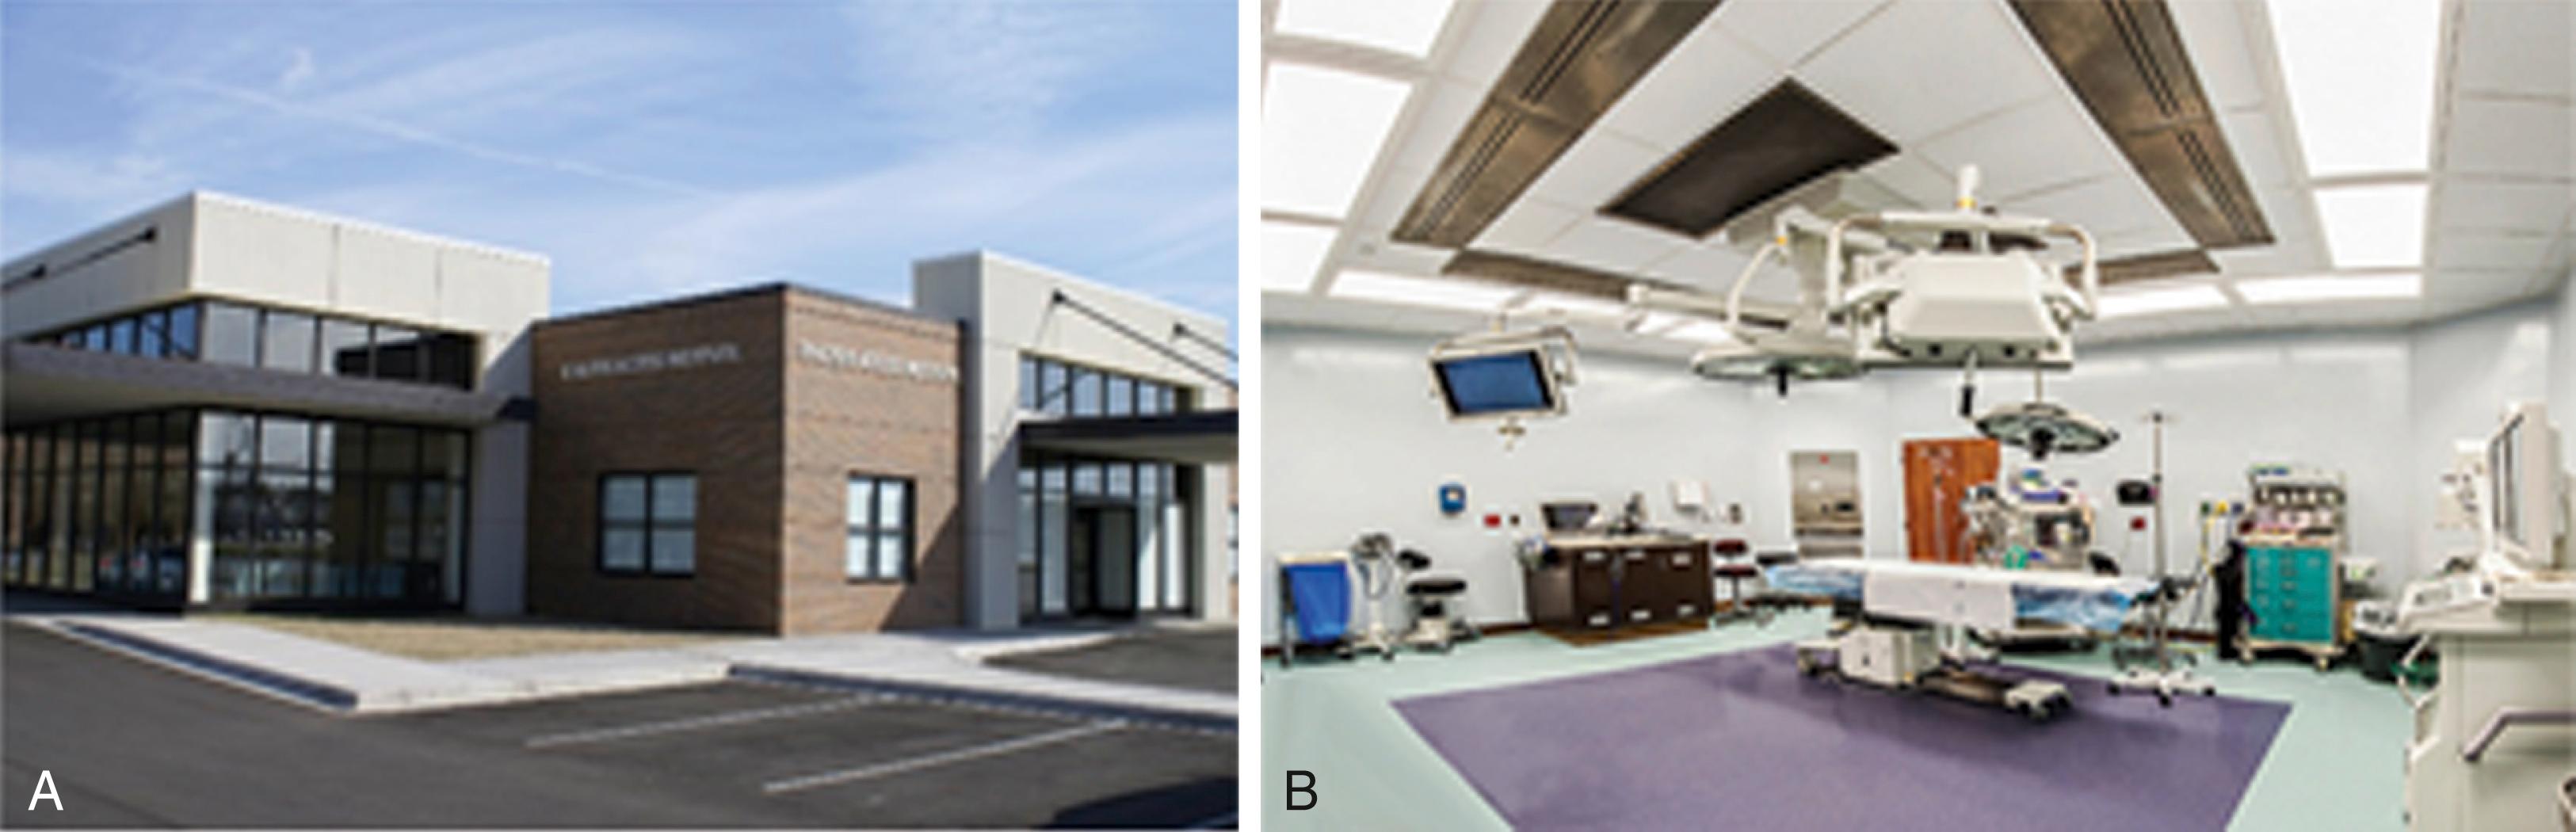 Figure 199.1, The complete dialysis access center has its own physical building ( A ), ideally attached to a hospital with access to acute dialysis, advanced radiology services (i.e., CT, MRI), and several spatial operating suites ( B ) fully equipped for anesthesia, mobile C-arms. The access center serves as a referral point for a larger geographic area in a collaborative spirit where patients are triaged and treated in one visit (“same day shopping”).